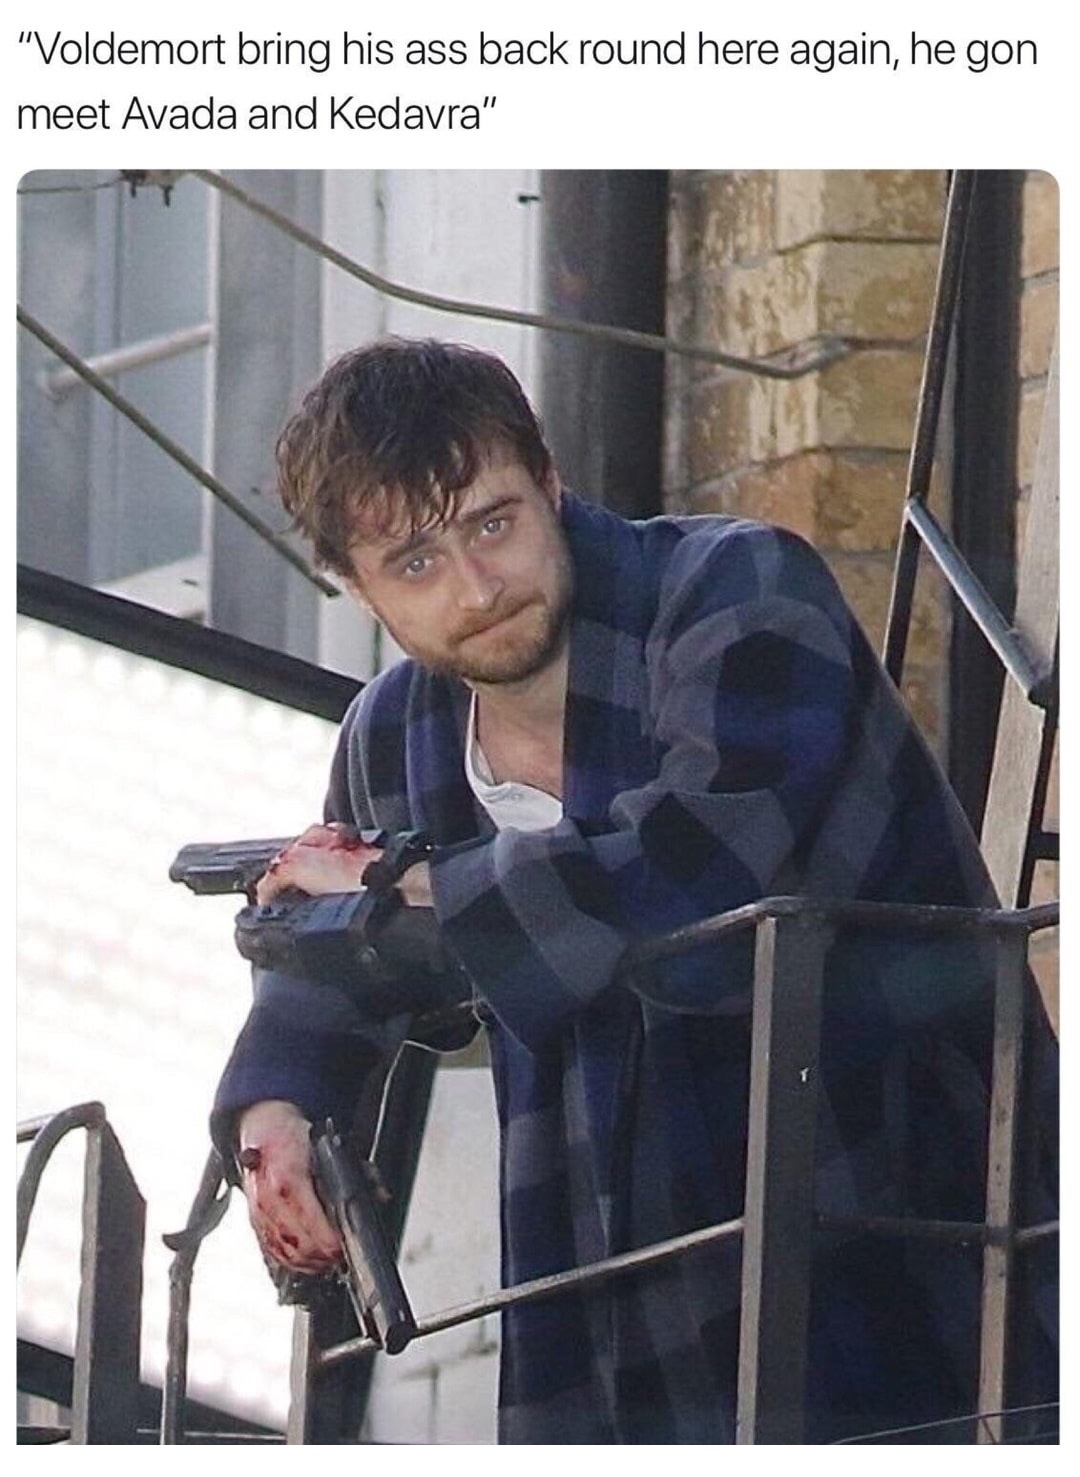 memes - daniel radcliffe with guns - "Voldemort bring his ass back round here again, he gon meet Avada and Kedavra"